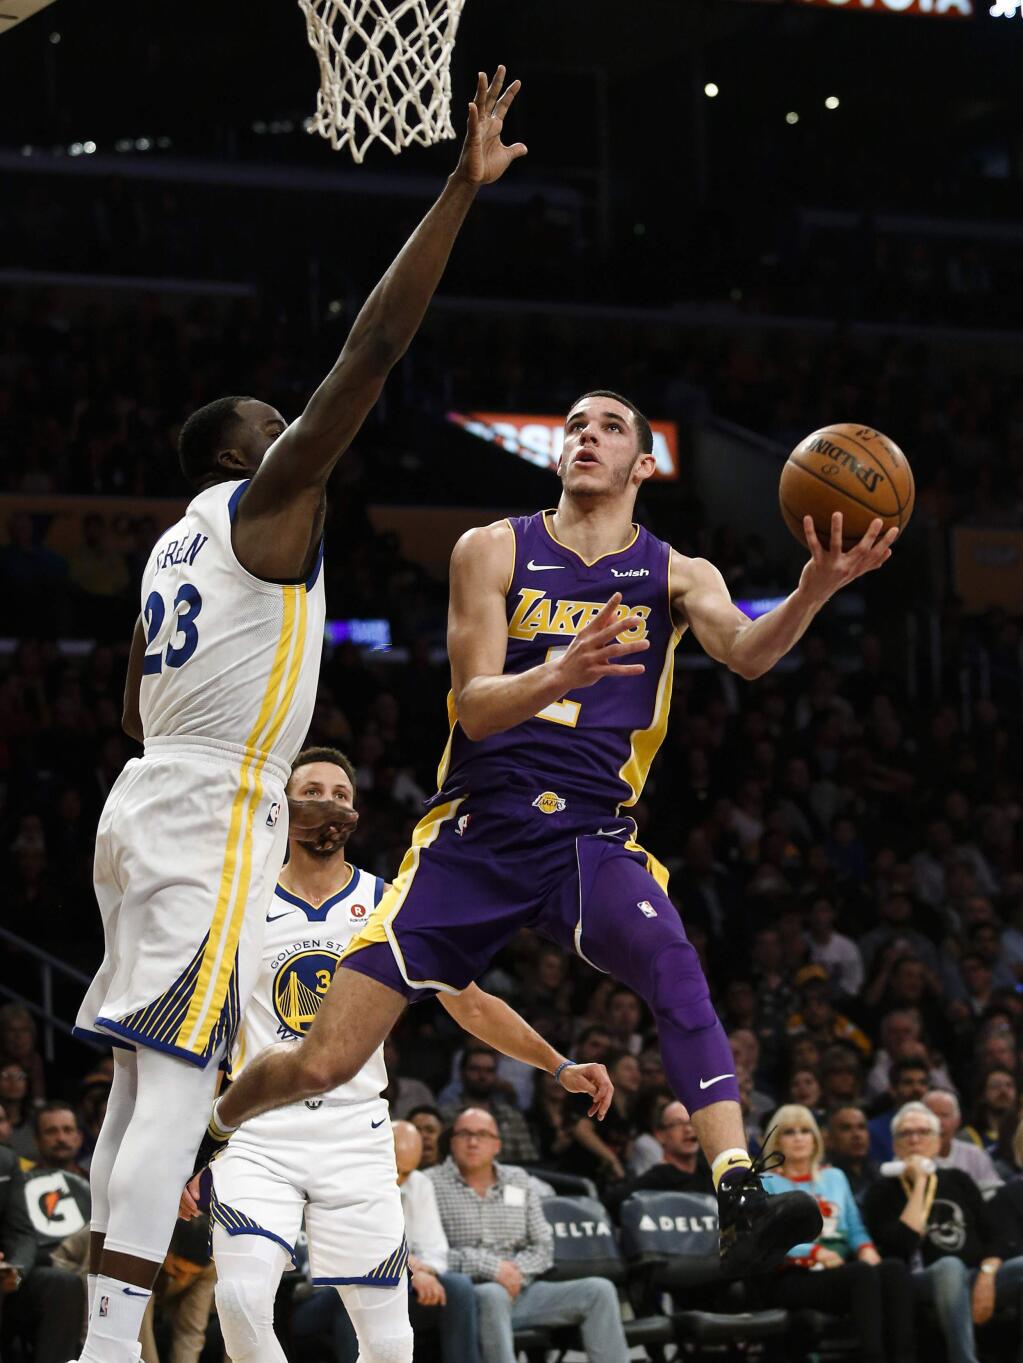 Los Angeles Lakers guard Lonzo Ball, right, looks for a shot as Golden State Warriors forward Draymond Green defends during the first half Wednesday, Nov. 29, 2017, in Los Angeles. (AP Photo/Ringo H.W. Chiu)